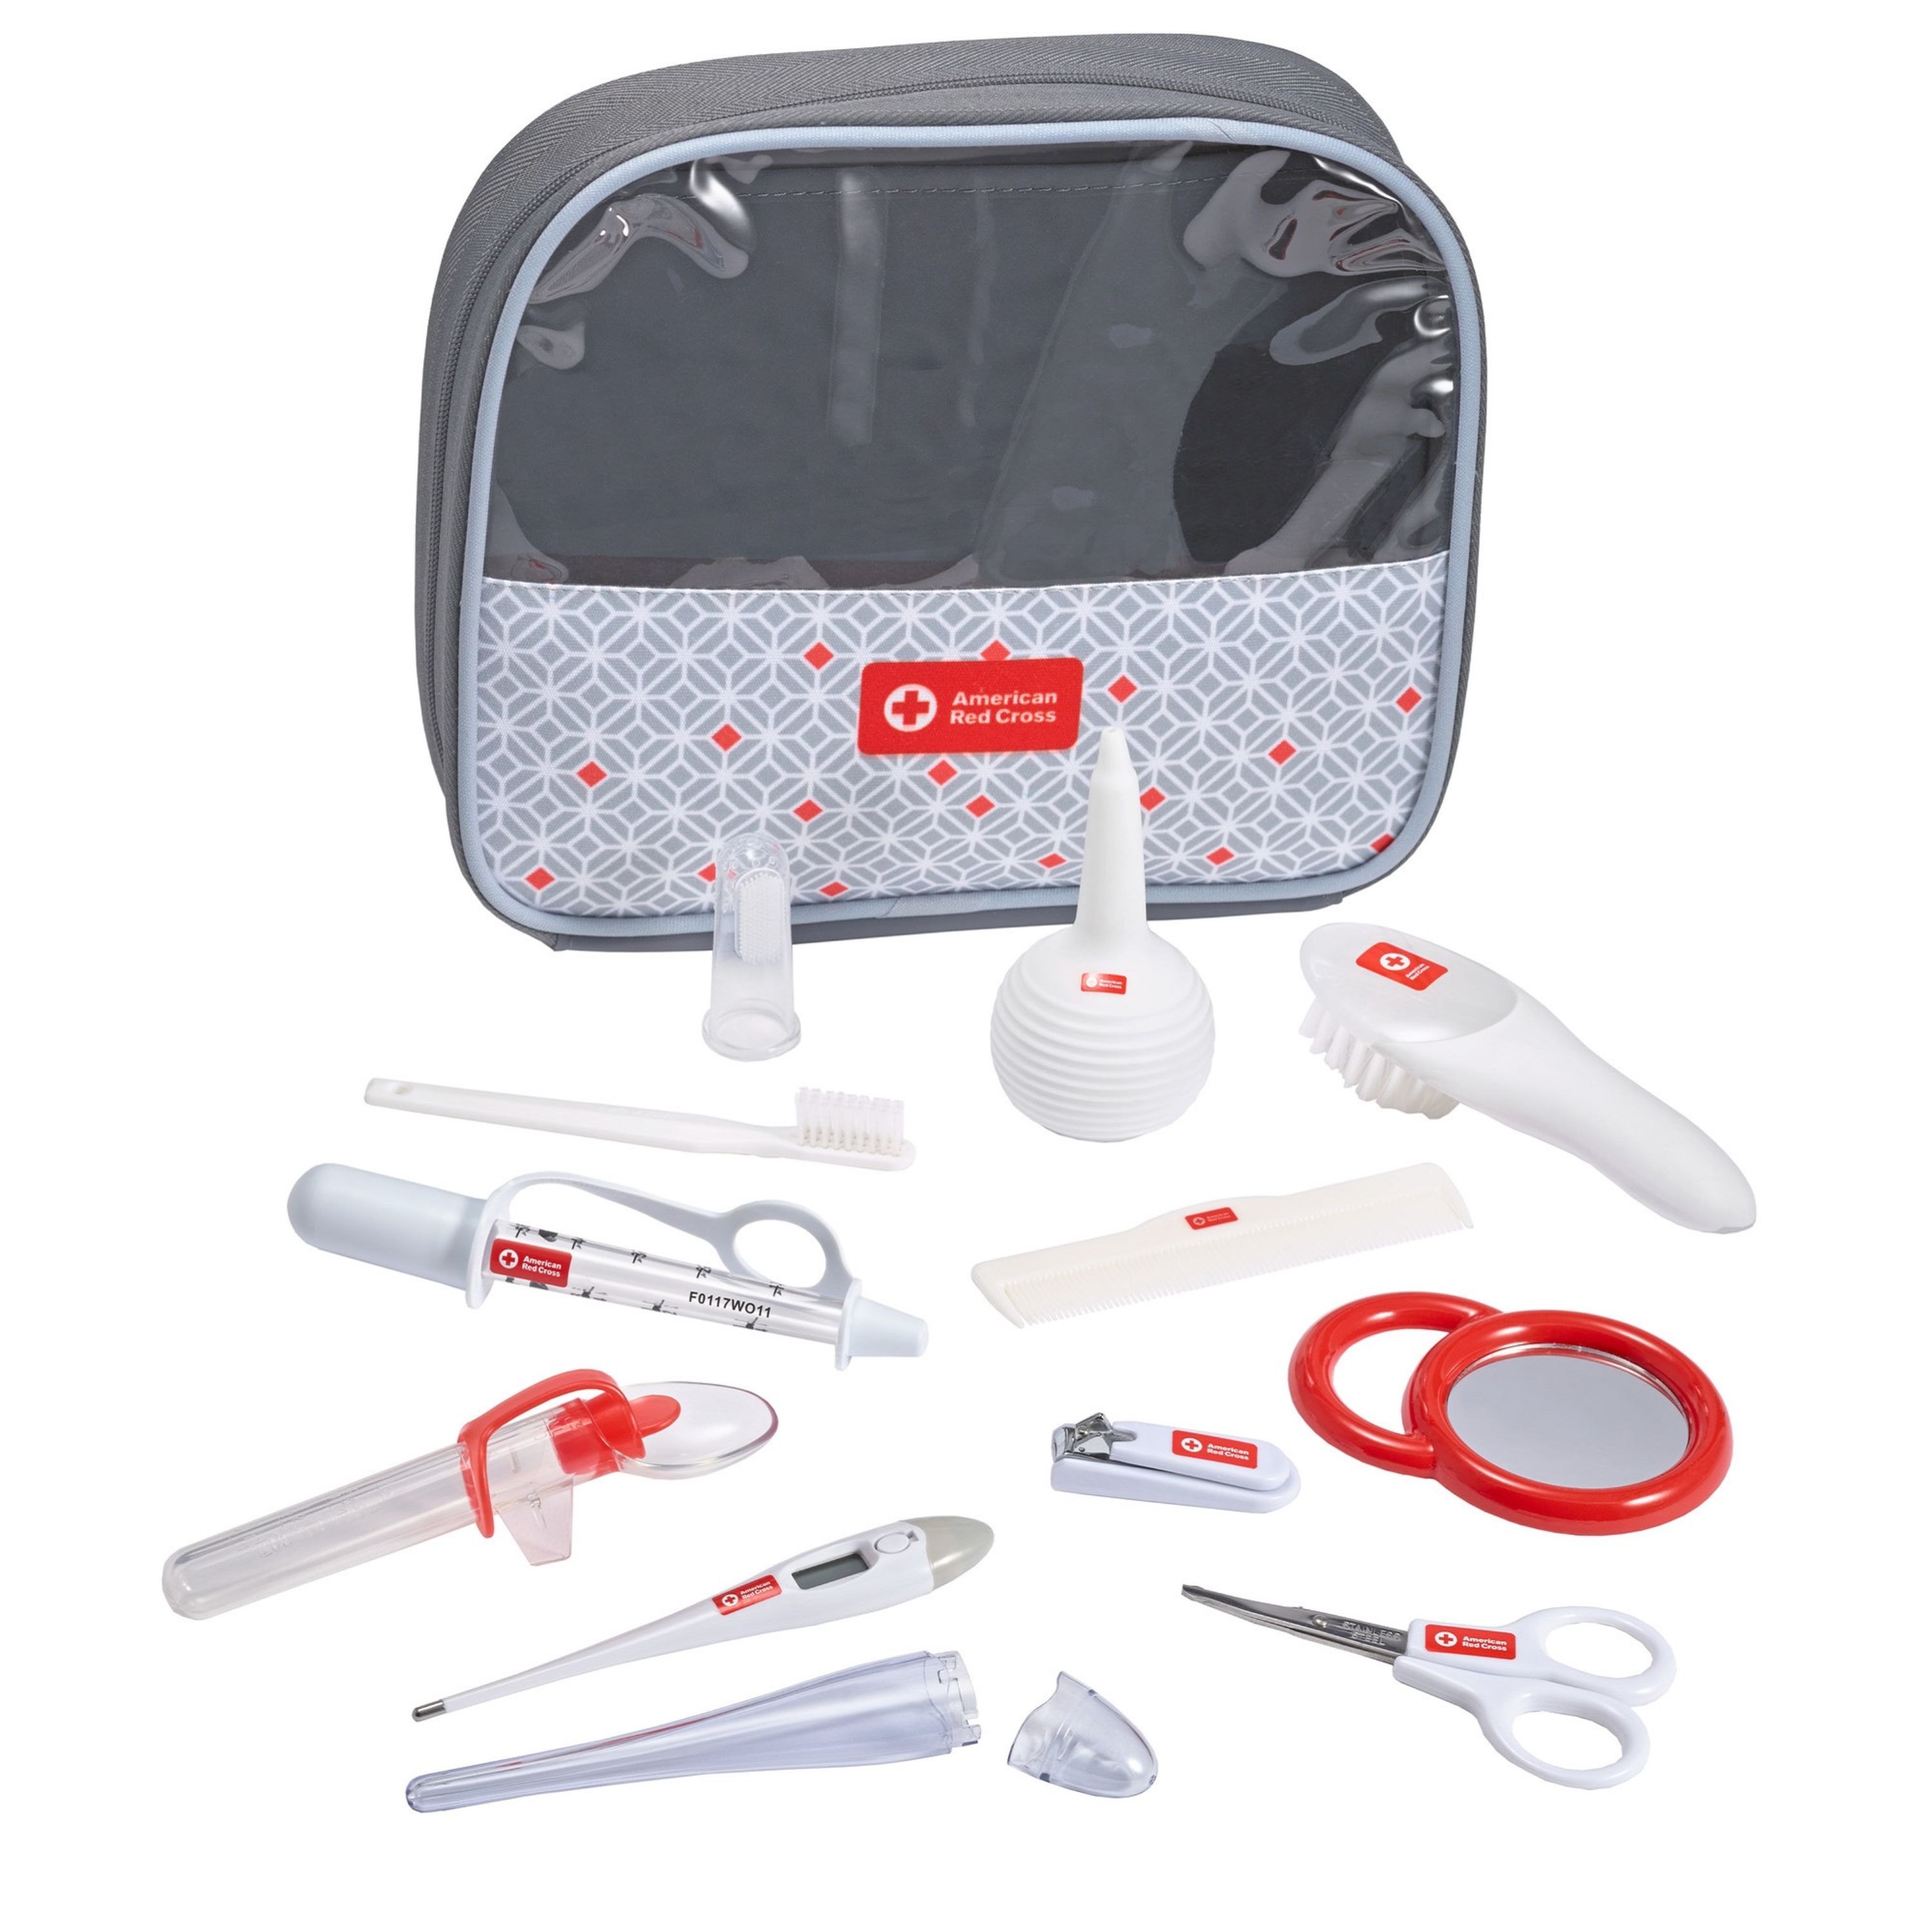 TOMY - American Red Cross Deluxe Health and Grooming Kit - image 1 of 5